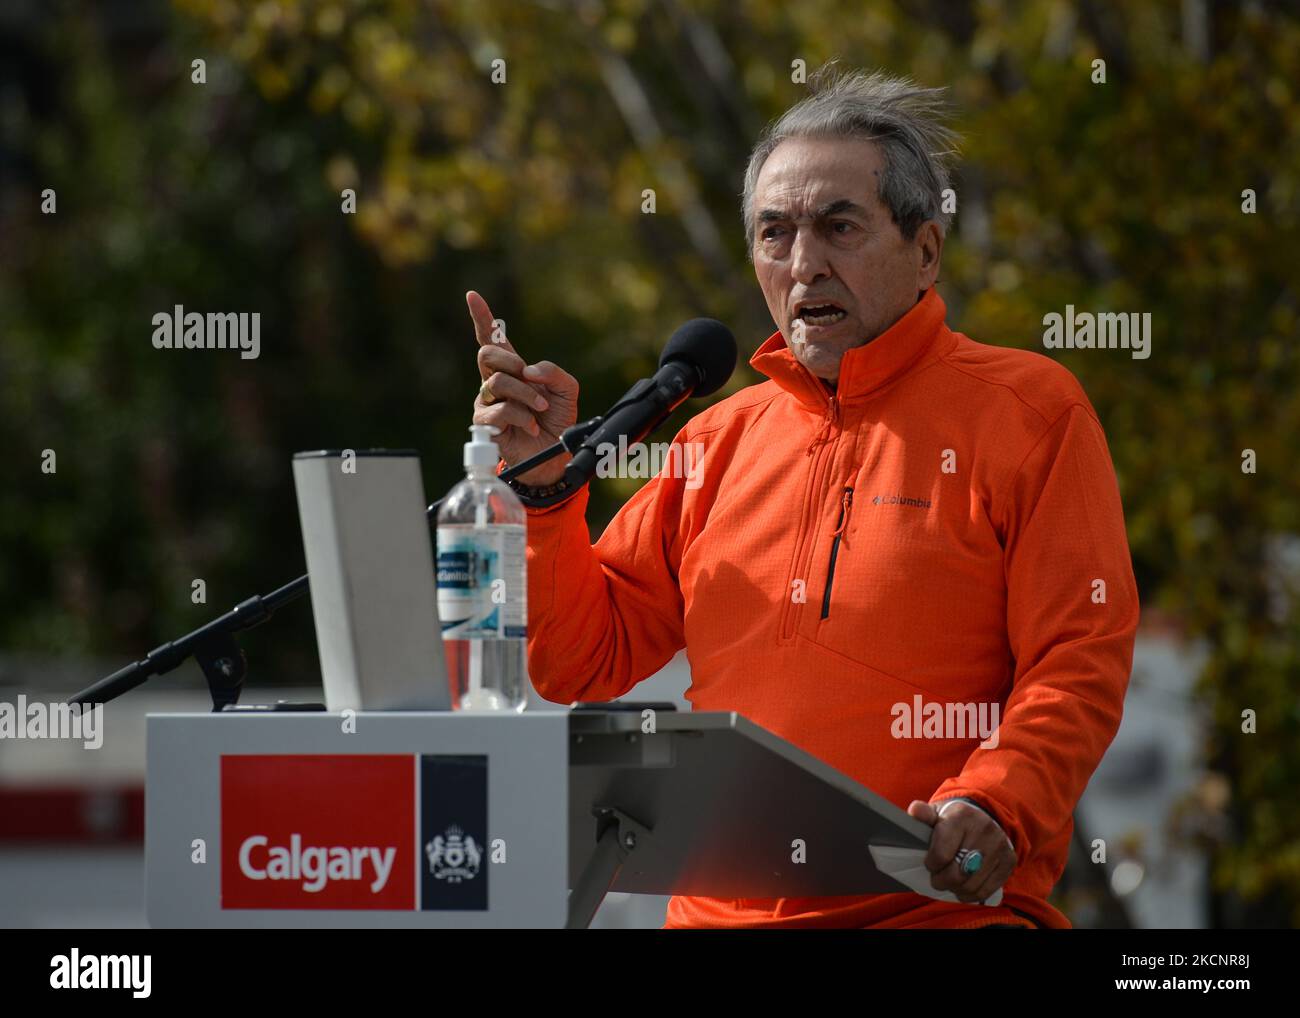 Phil Fontaine, an Aboriginal Canadian leader and a former National Chief of the Assembly of First Nations, speaks during an outdoor official ceremony at Fort Calgary, as the City of Calgary commemorates Orange Shirt Day, and observes the first National Day for Truth and Reconciliation (a federal statutory holiday). On Thursday, 30 September 2021, in Fort Calgary, Calgary, Alberta, Canada. (Photo by Artur Widak/NurPhoto) Stock Photo